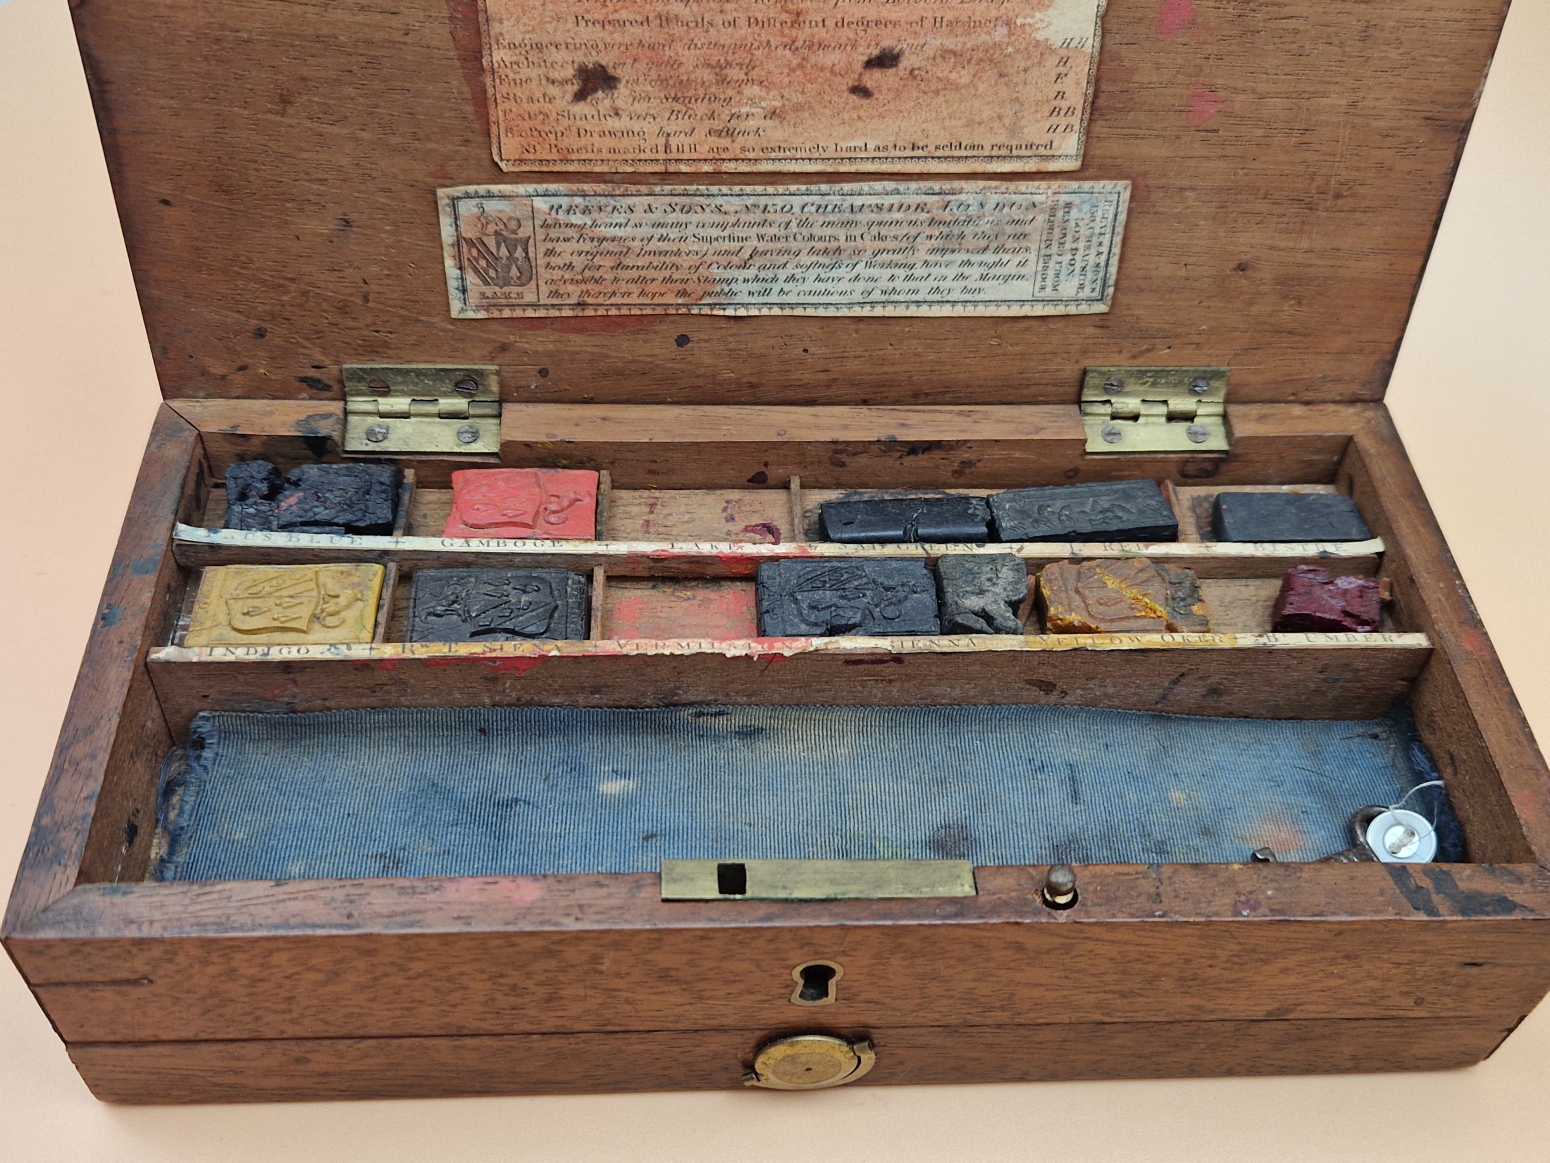 A LATE 19th C. REEVES MAHOGANY PAINT BOX CONTAINING SOME BLOCKS OF UNUSED PAINT AND CERAMIC PALETTES - Image 2 of 9